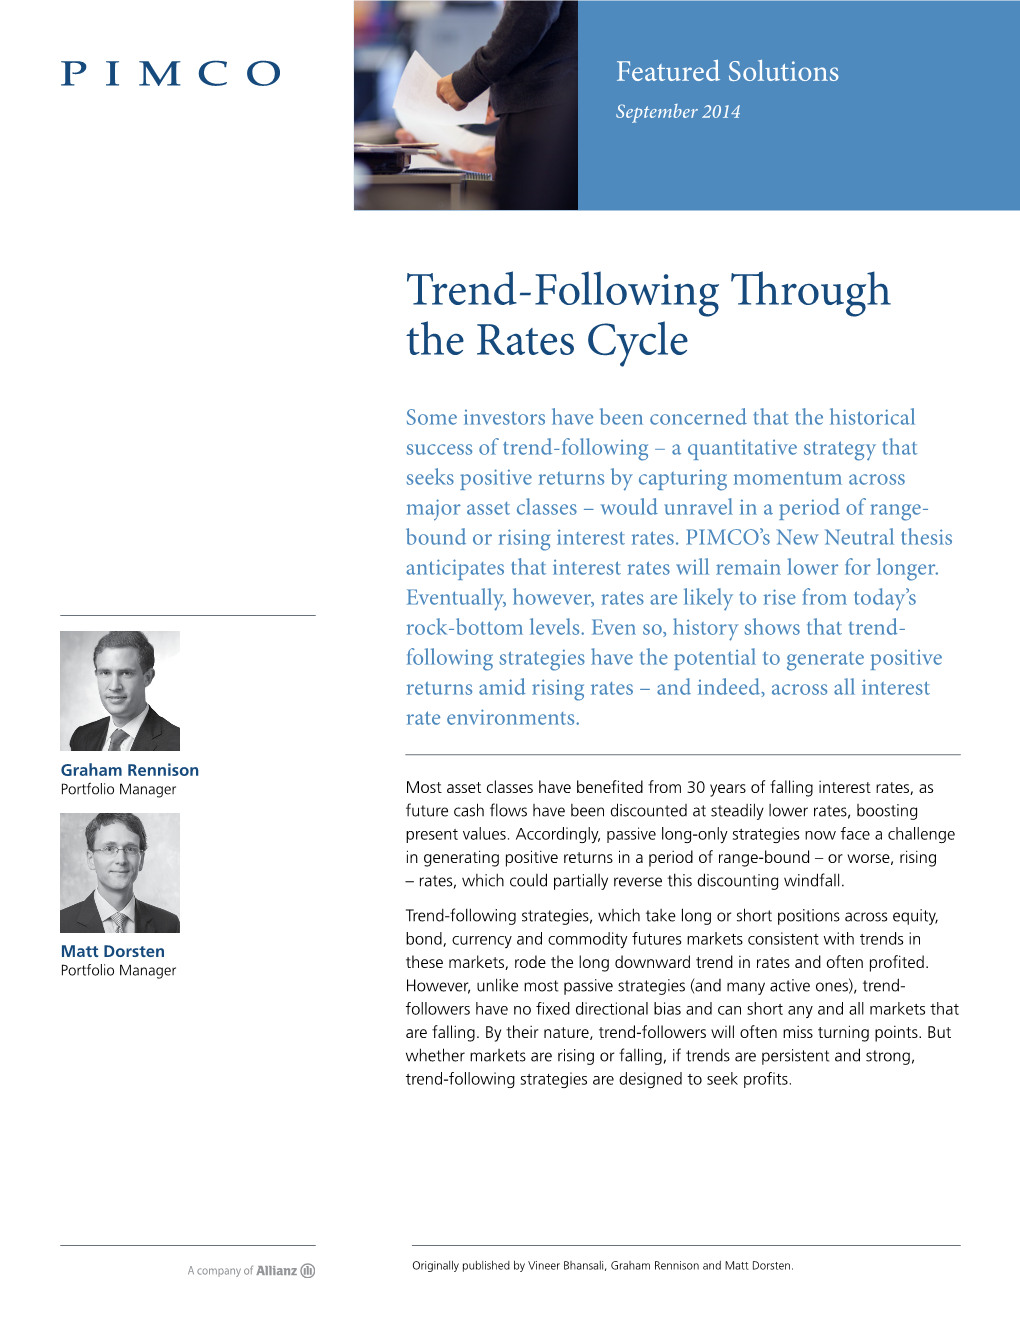 Trend-Following Through the Rates Cycle